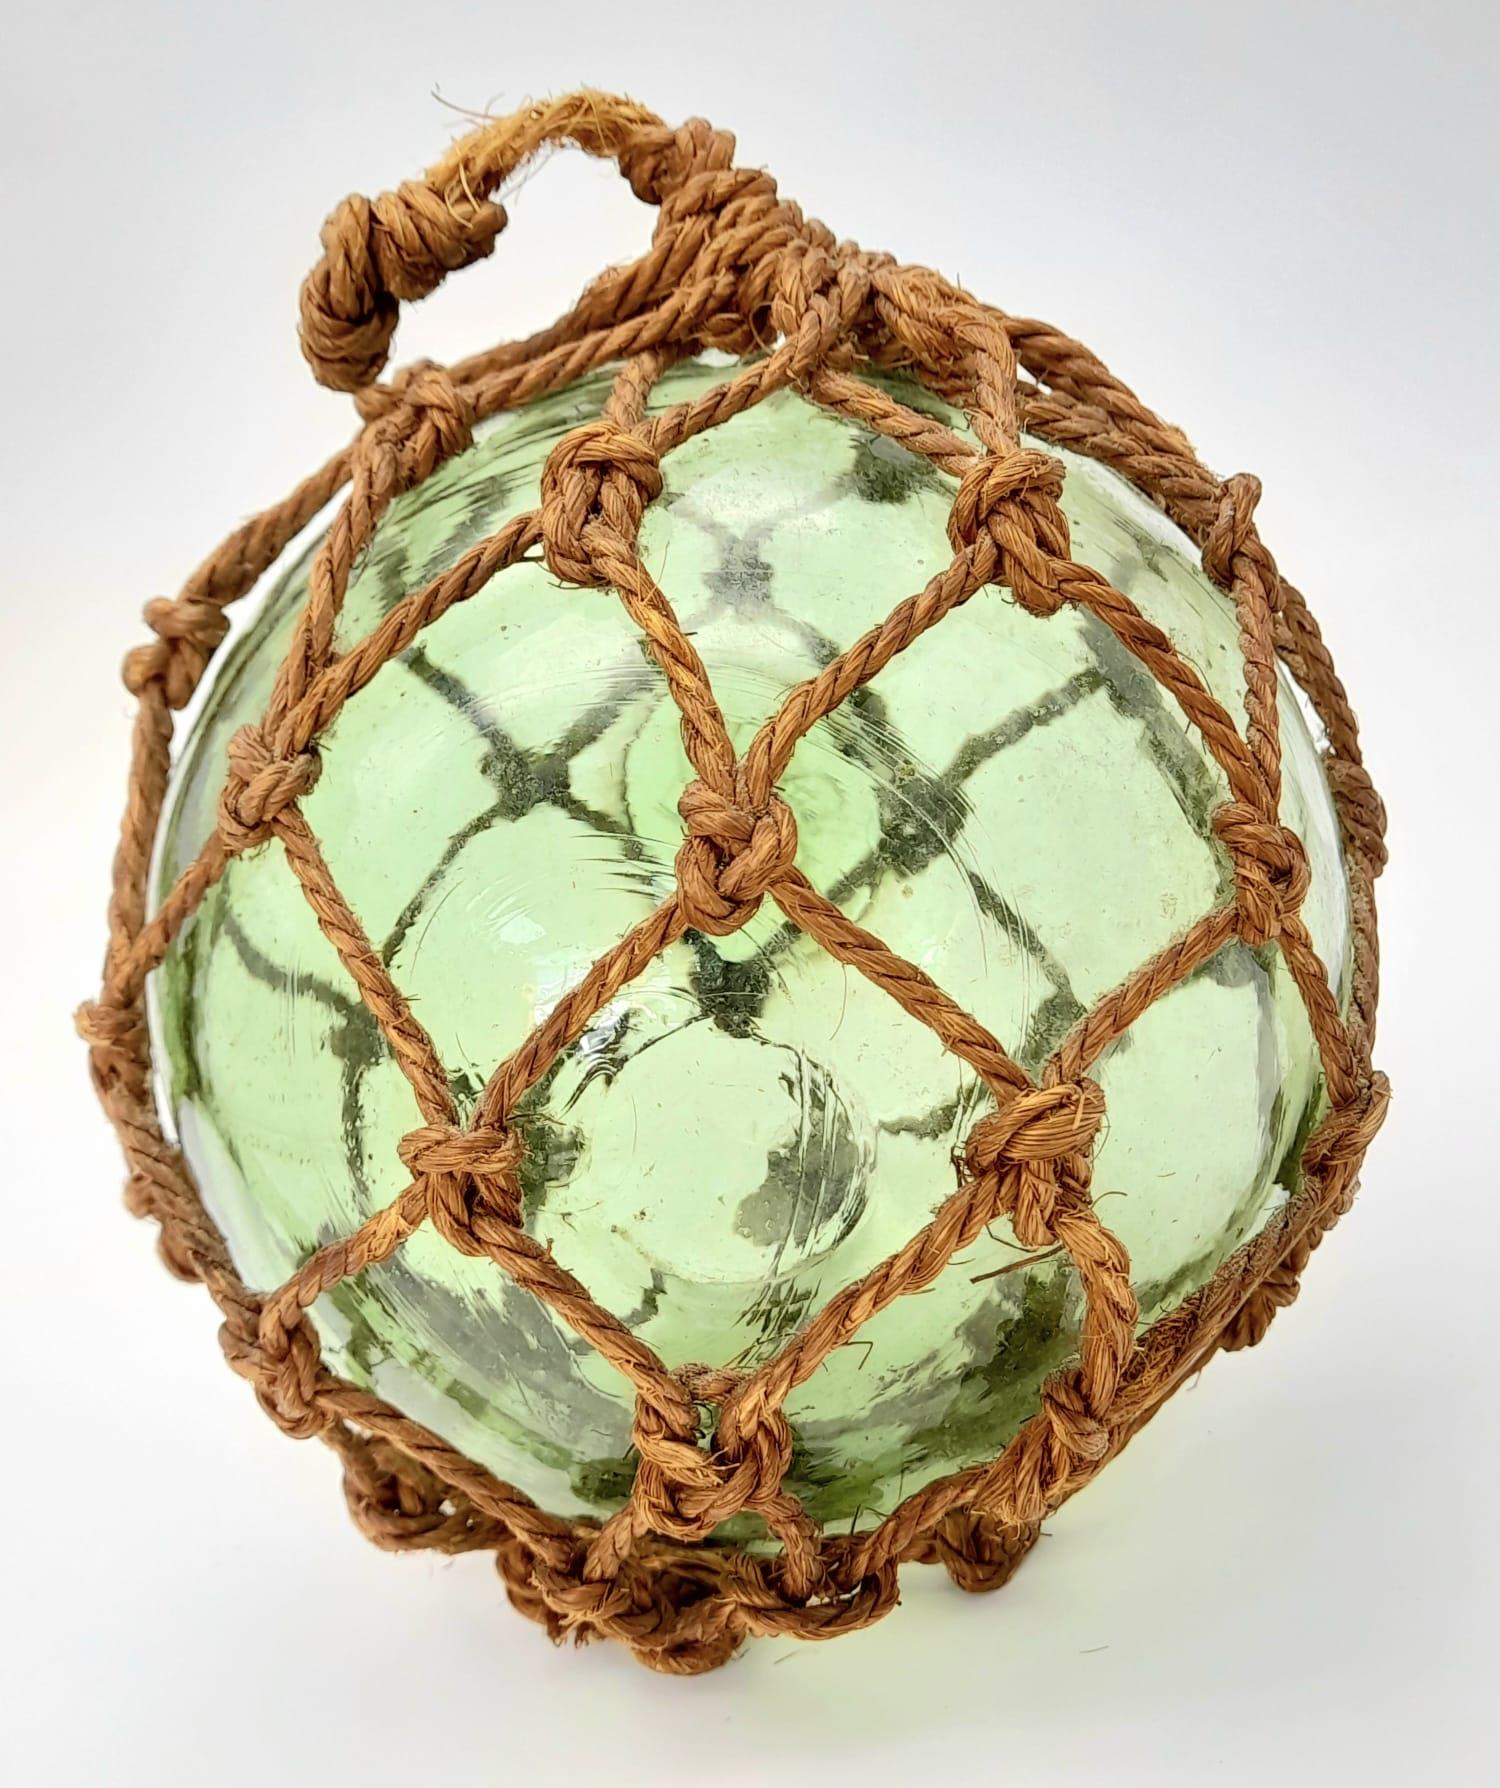 An Antique Japanese Glass Fishing Float with a Lovely Pontil Mark and Netting. - Image 4 of 4